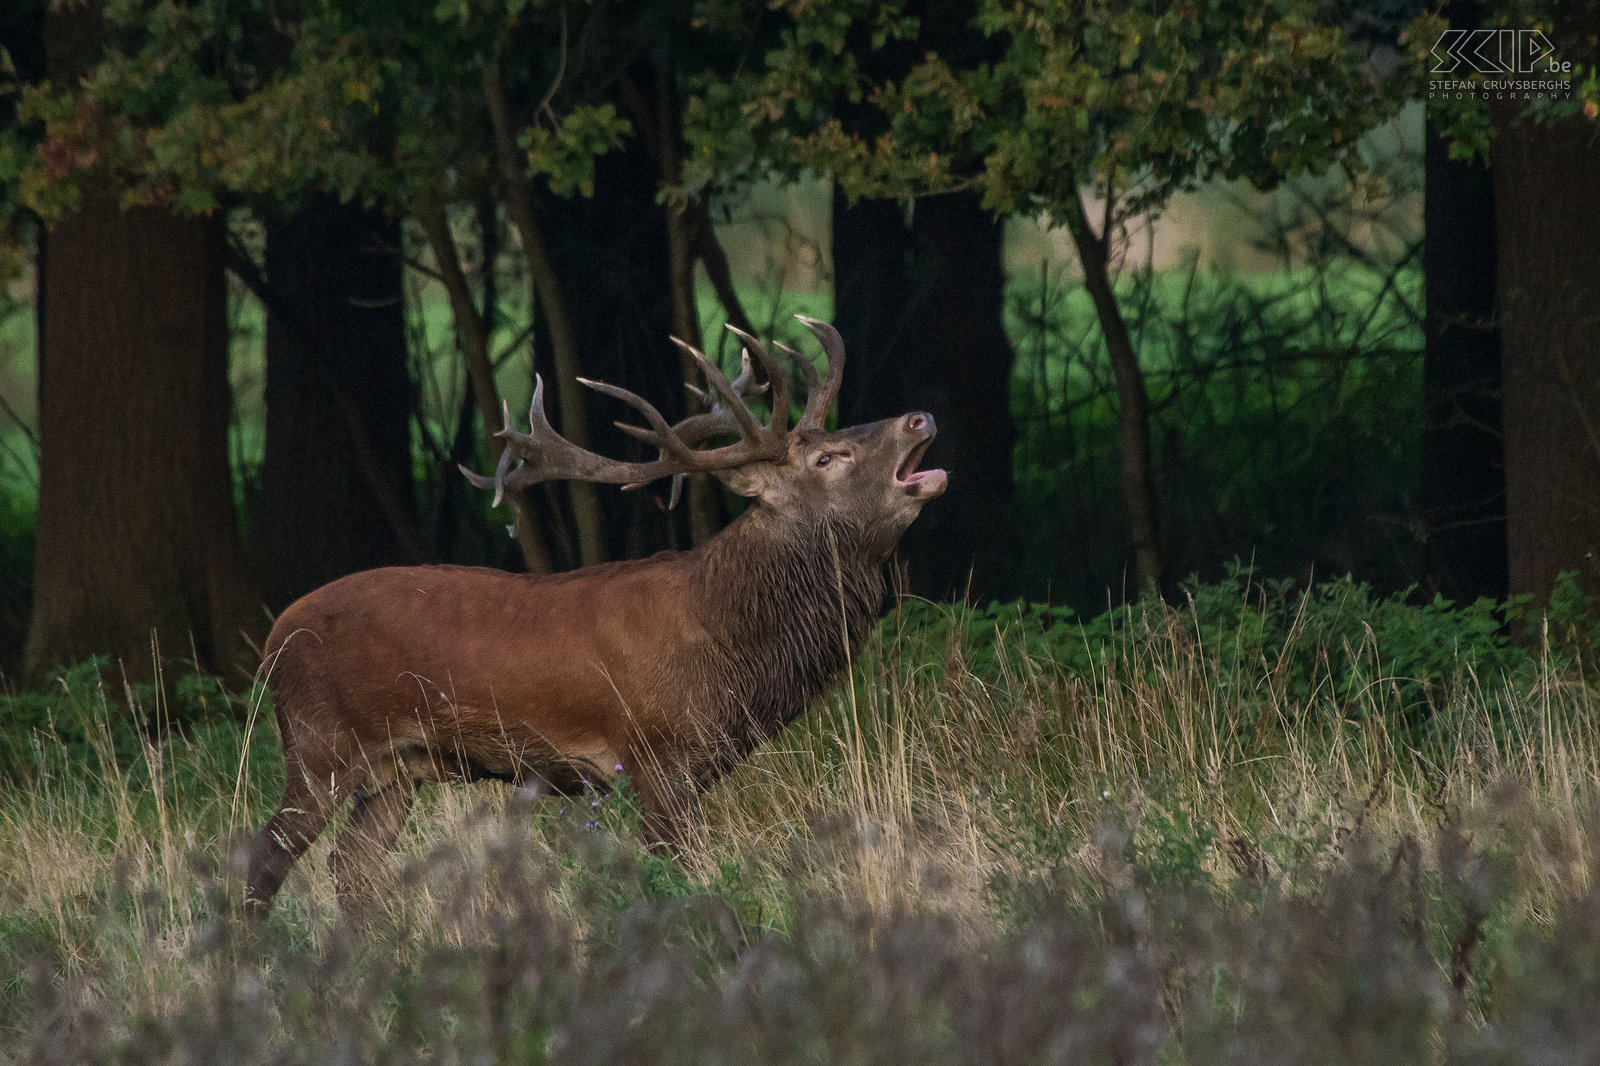 Red deer rut - Roaring red deer stag A male red deer with impressive antlers starts roaring to keep his harem of females together and to attract other hinds. Stefan Cruysberghs